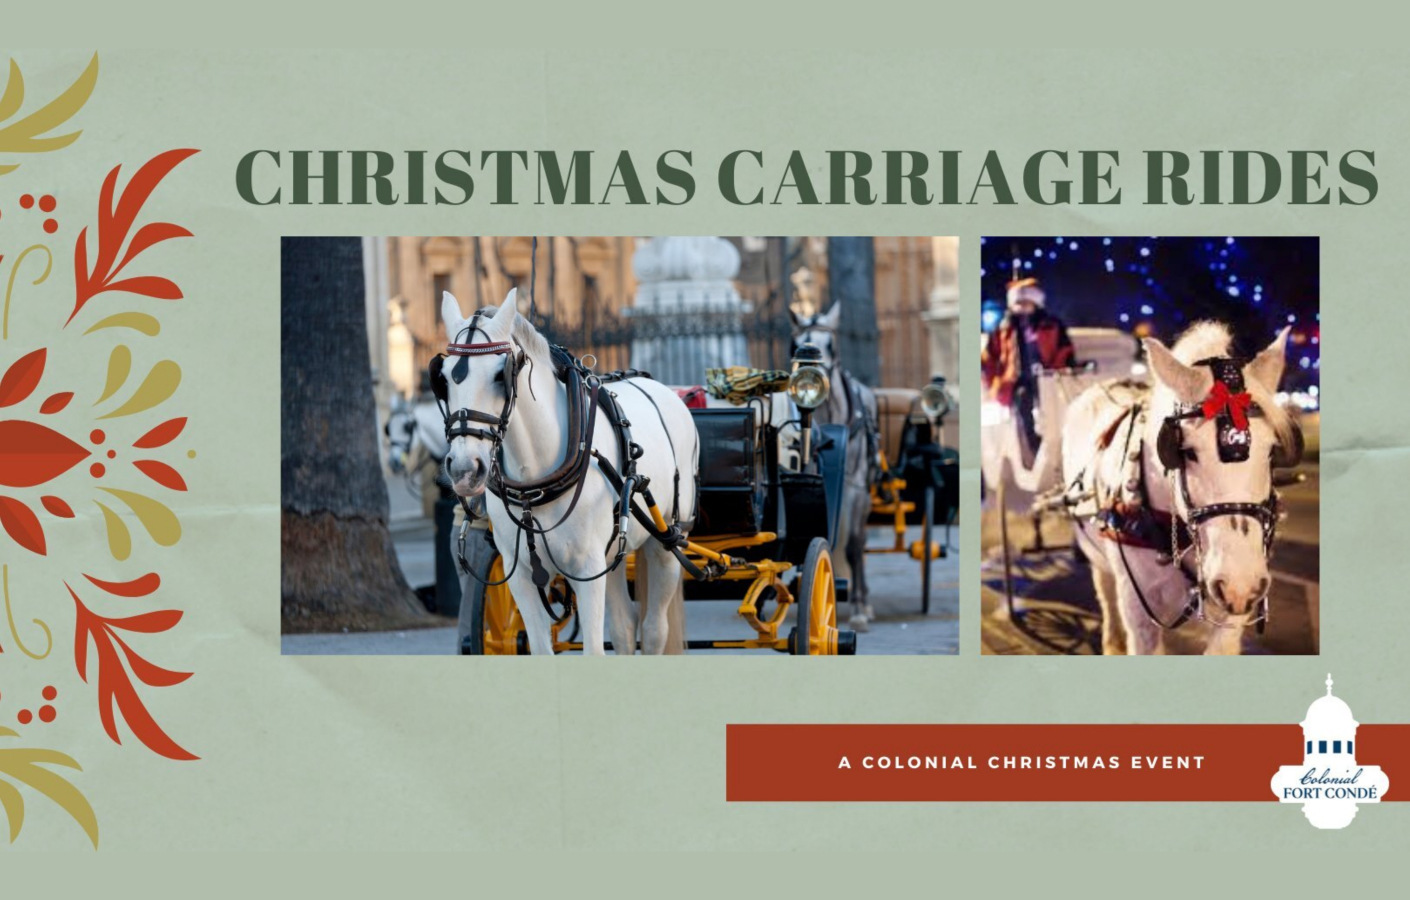 CHRISTMAS CARRIAGE RIDES